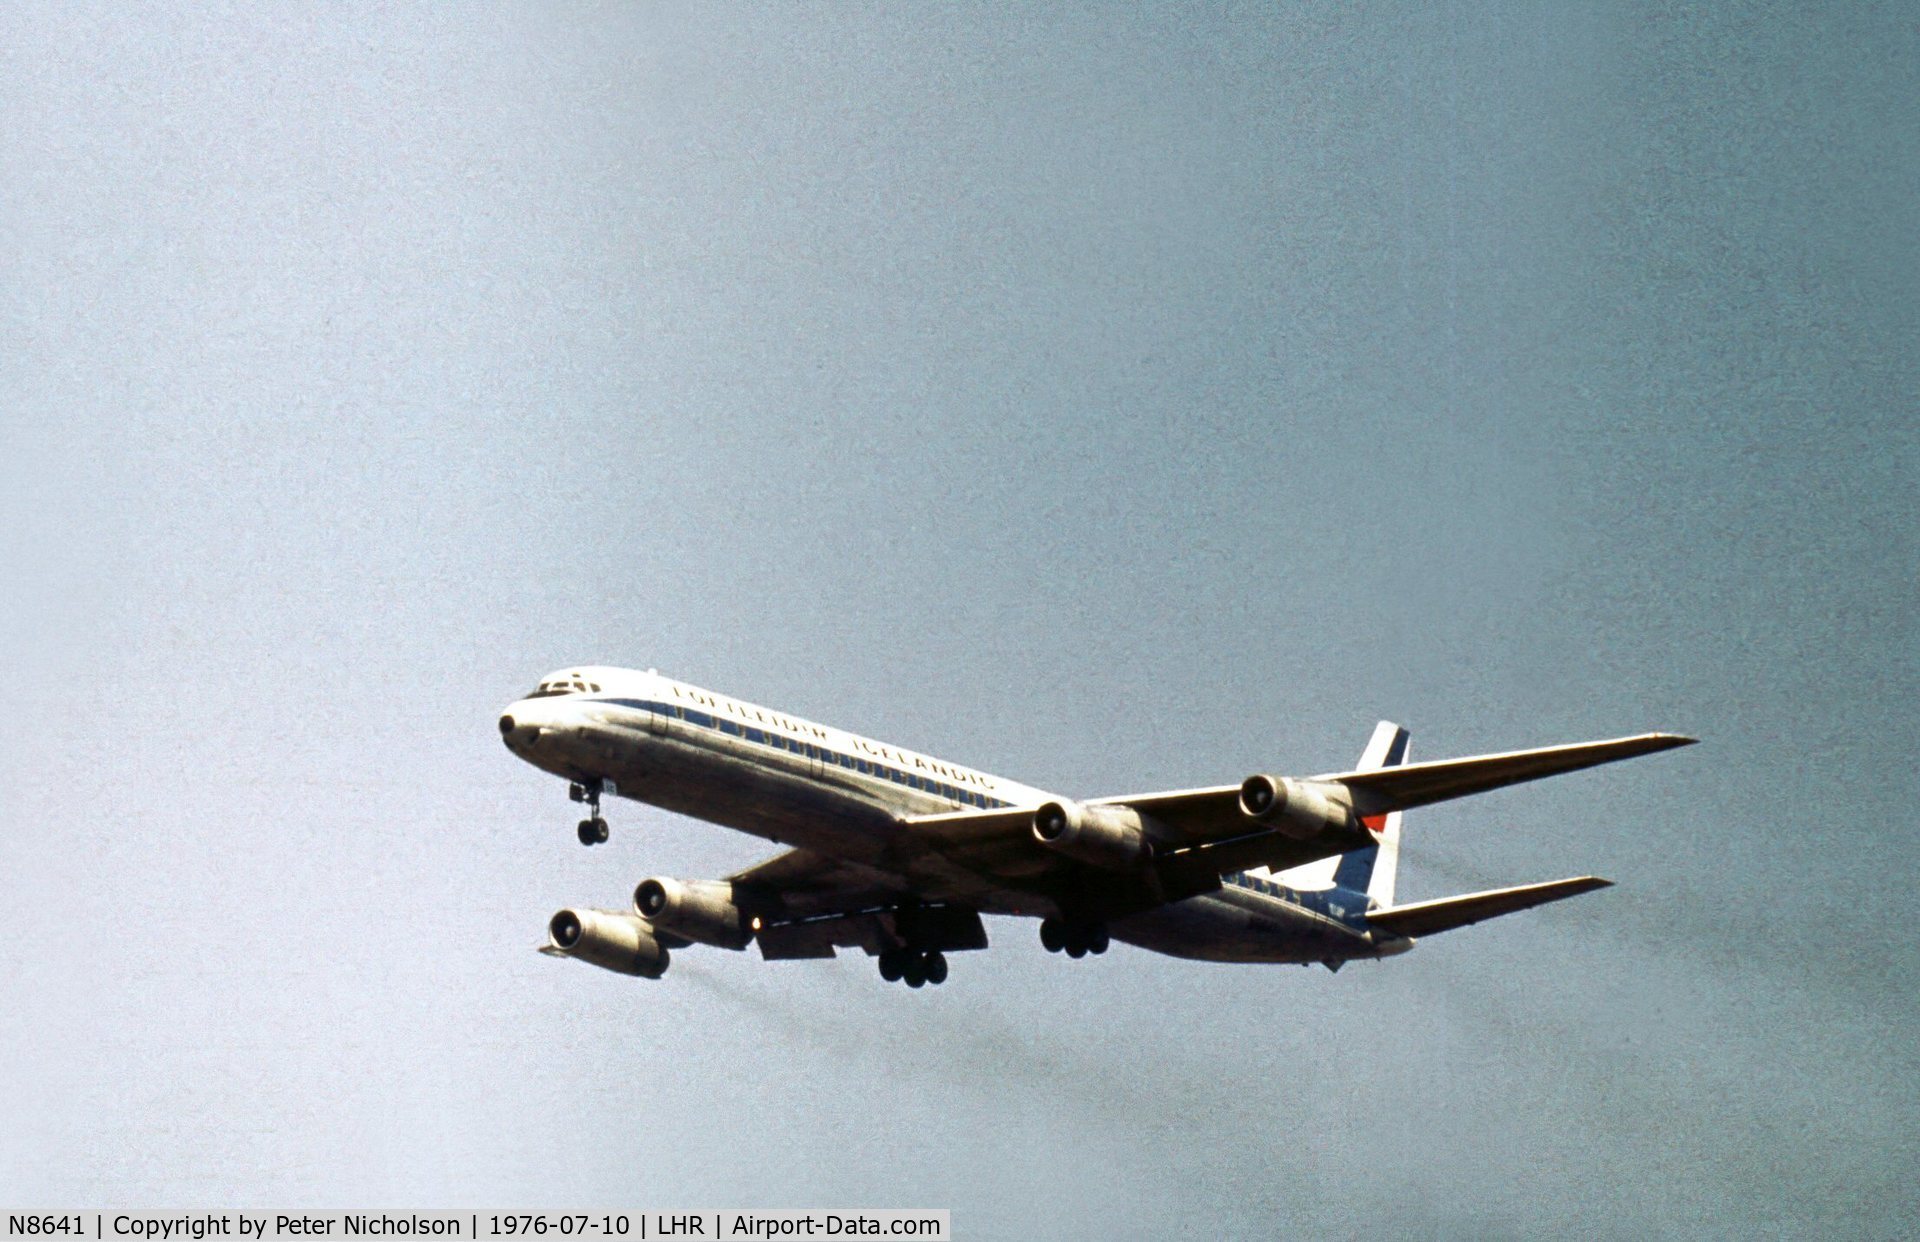 N8641, 1969 Douglas DC-8-63 C/N 46106, DC-8-63, on lease to Loftleidir of Iceland from Seaboard World, on final approach to London Heathrow in the Summer of 1976.